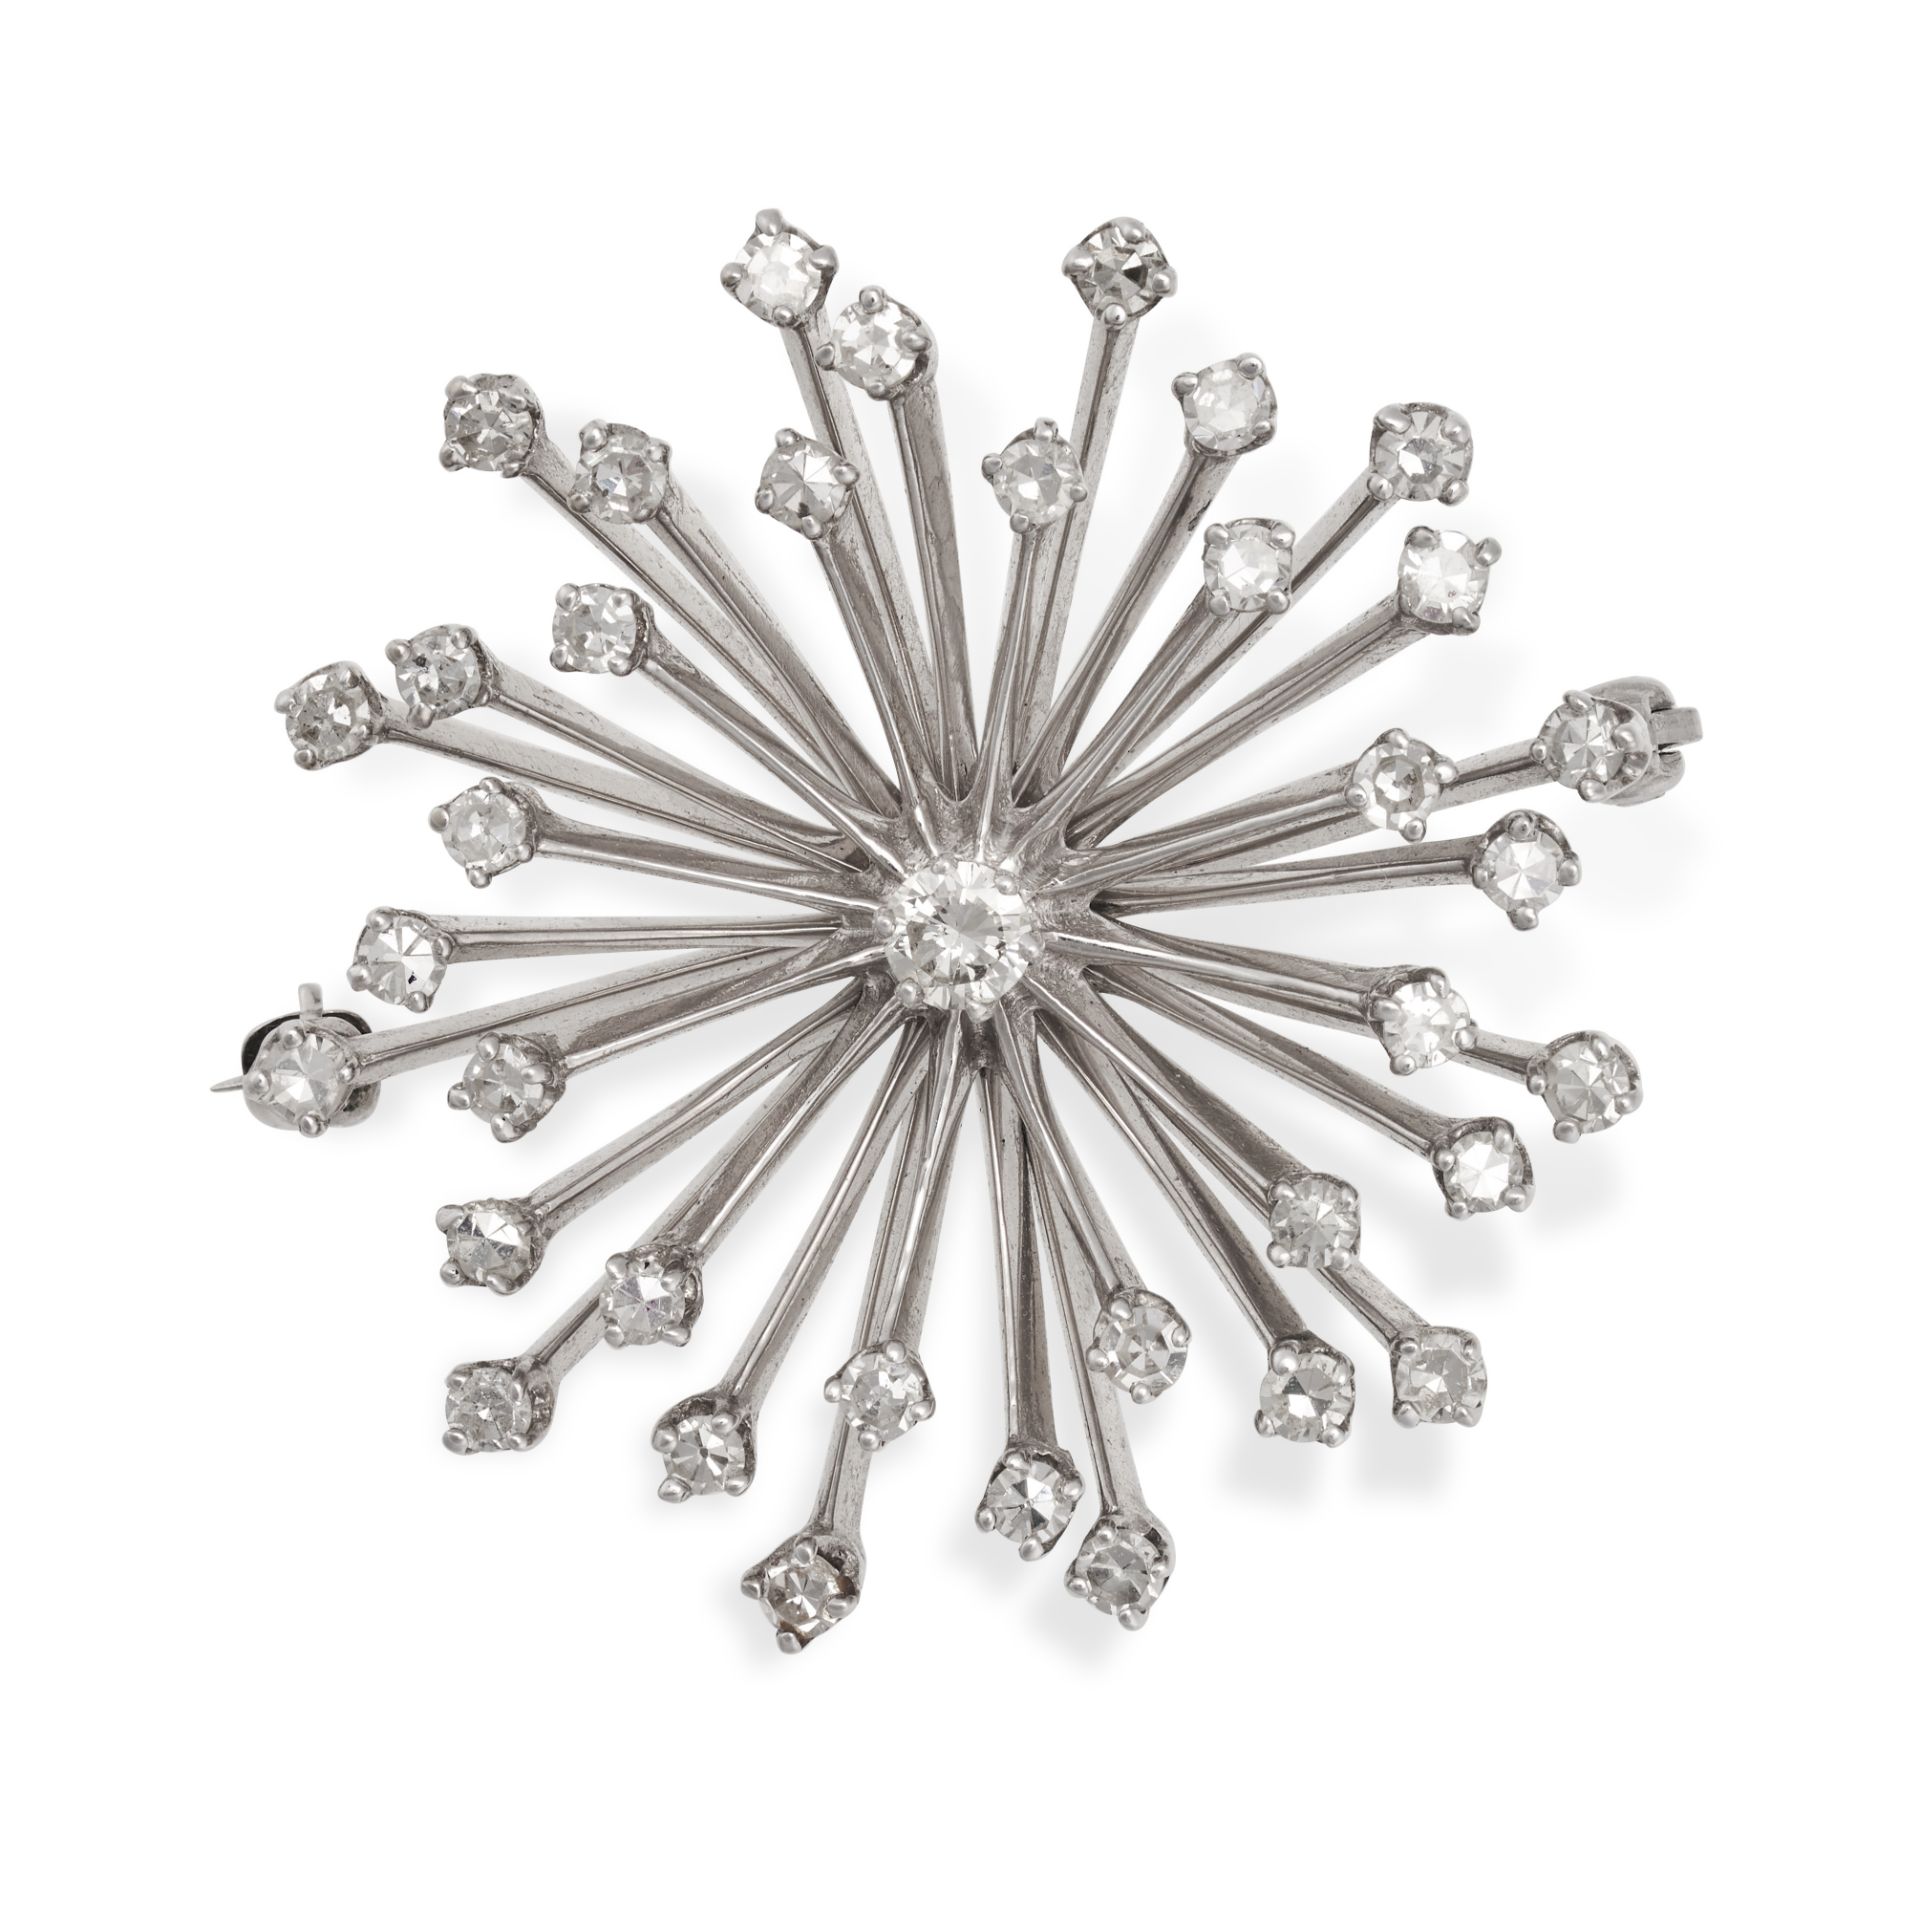 A VINTAGE DIAMOND SUNBURST BROOCH in white gold, set throughout with round brilliant and single c...